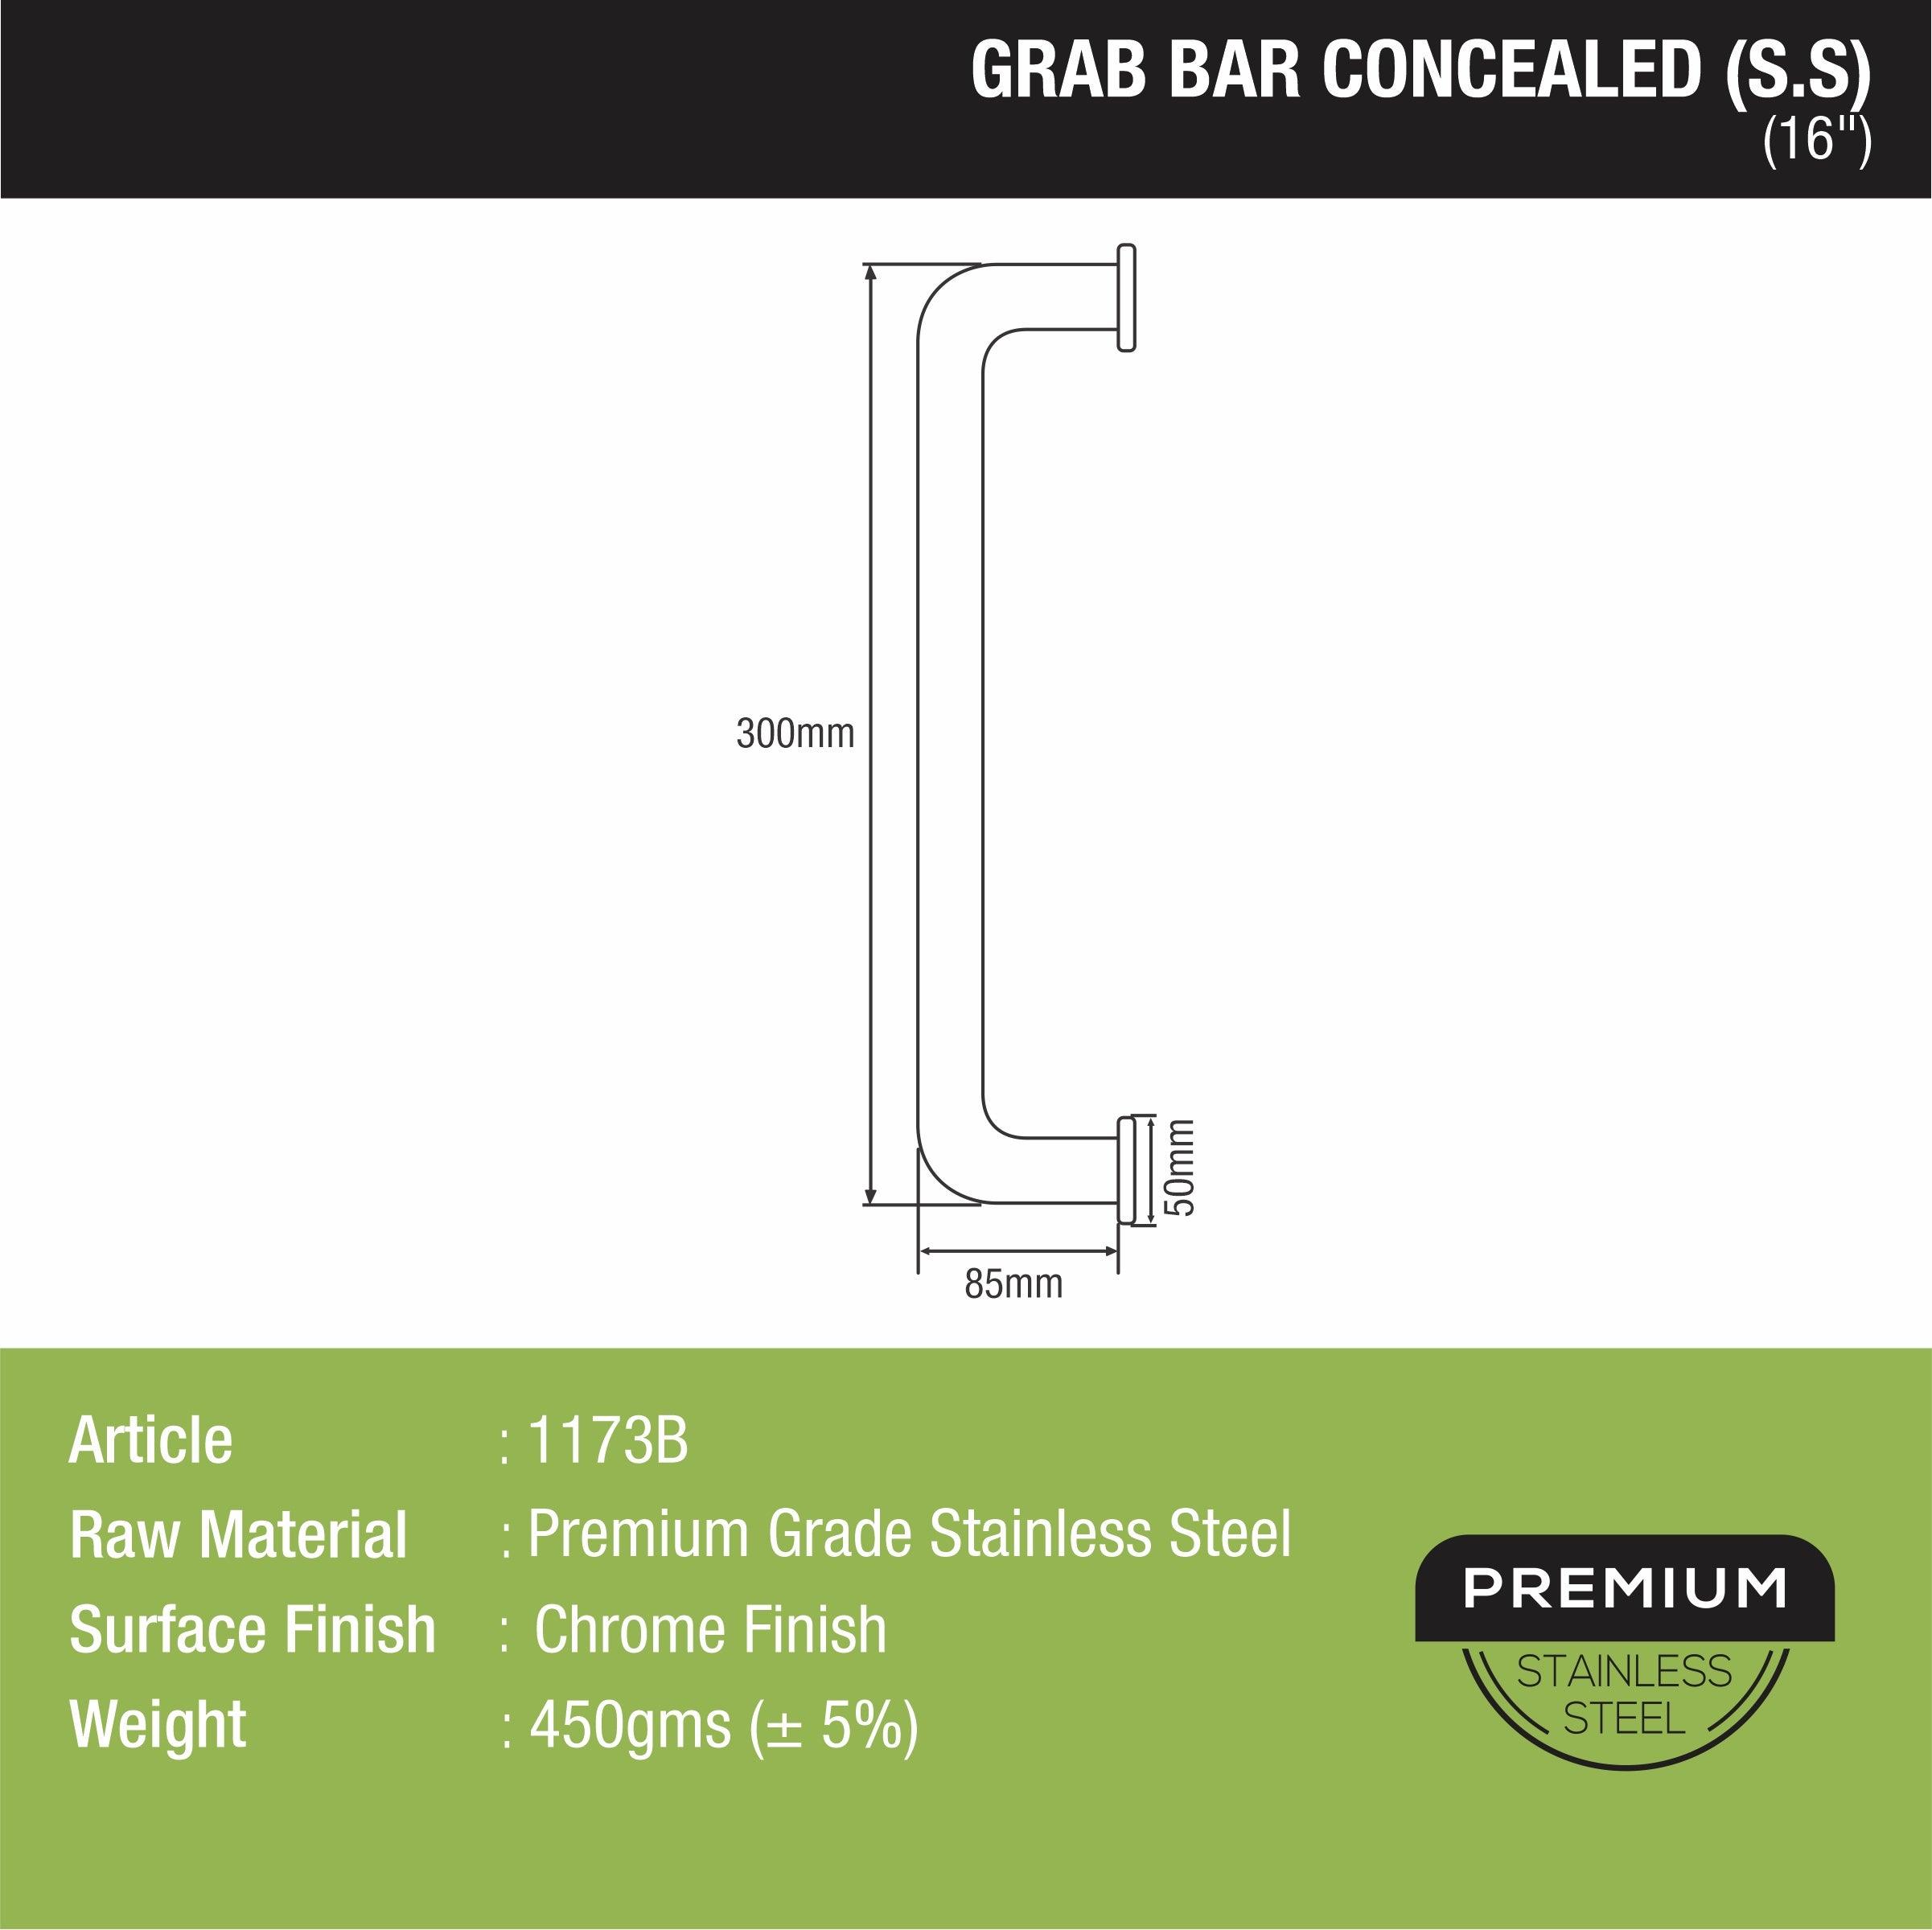 Stainless Steel Grab Bar (16 Inches) sizes and dimensions